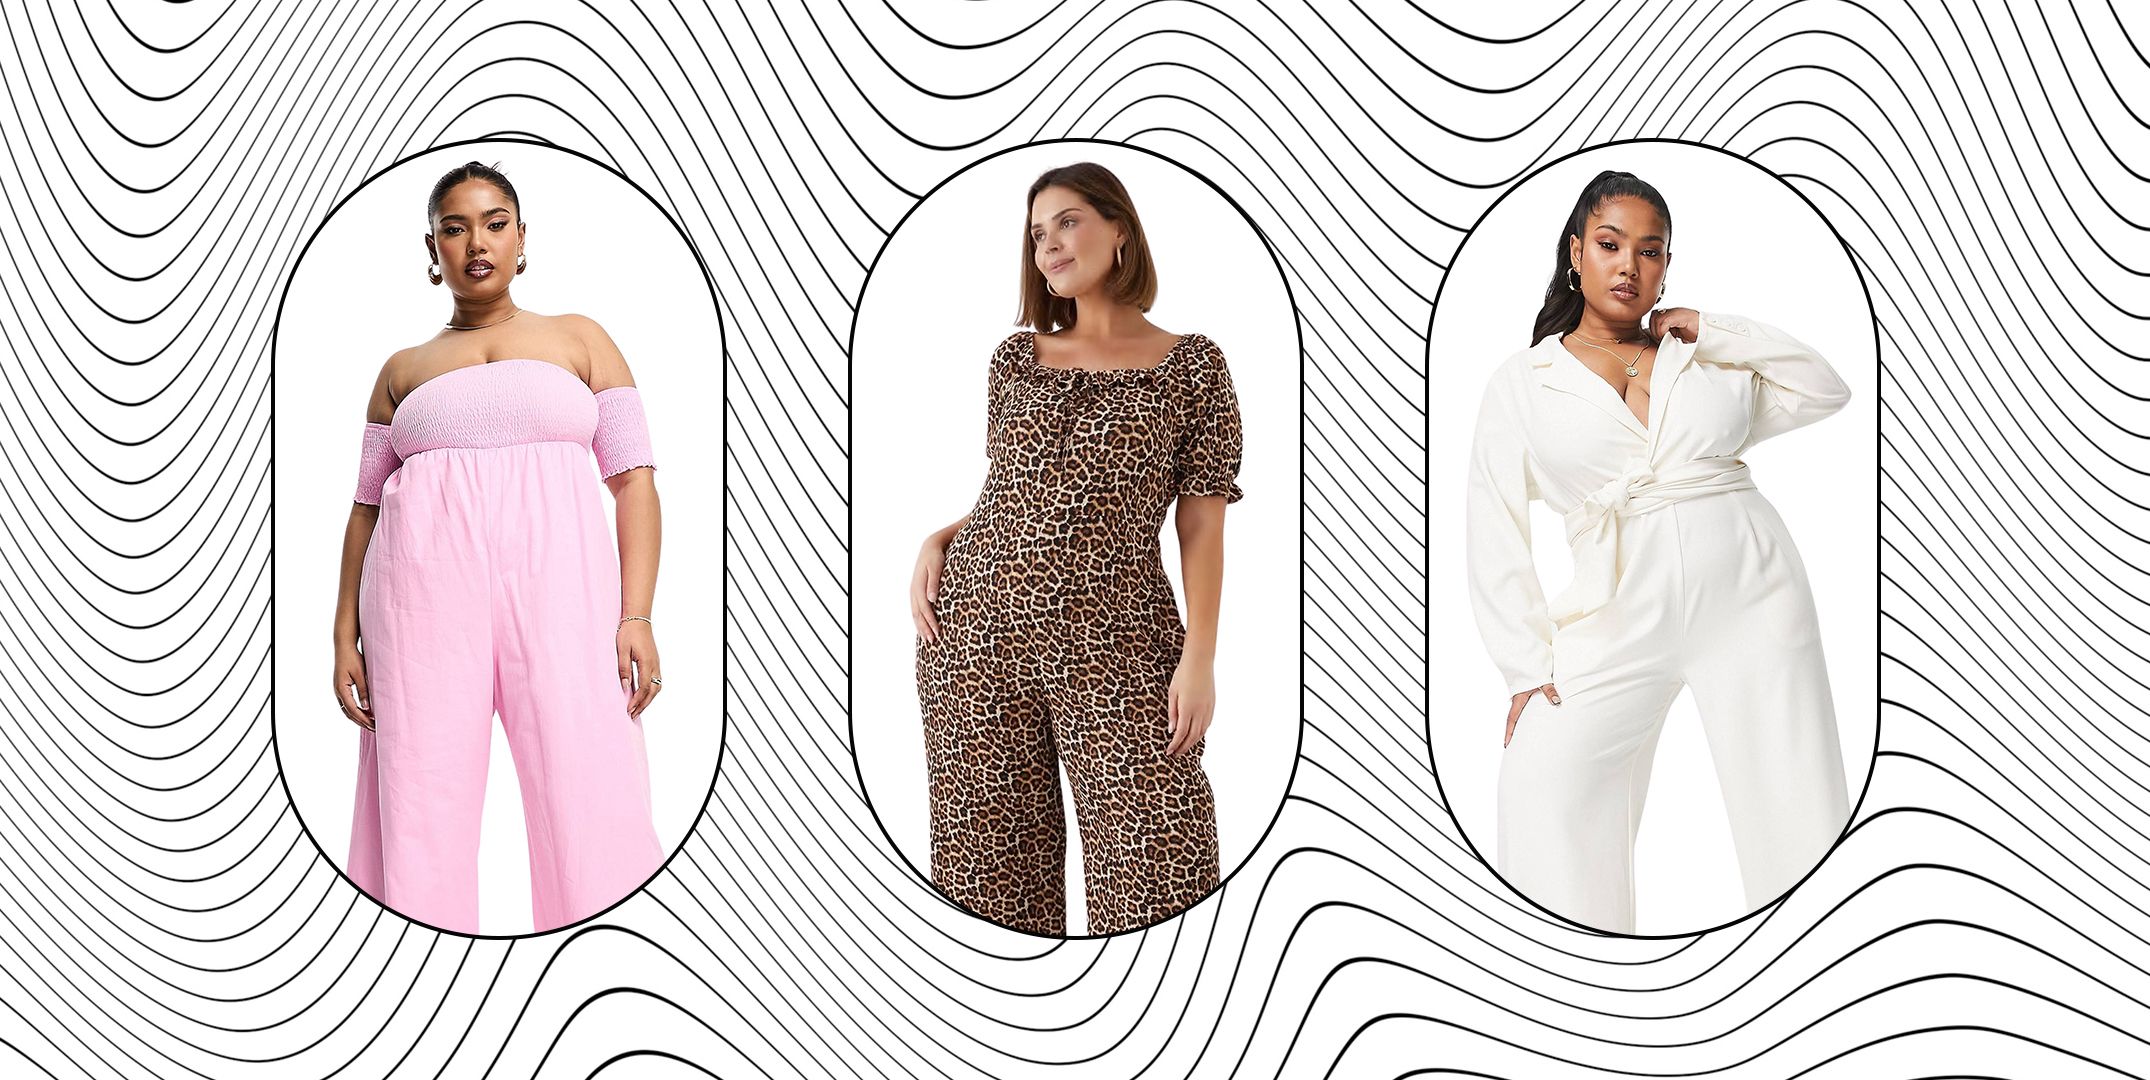 23 Bridesmaid Jumpsuits for the Trendiest Wedding Party Vibes